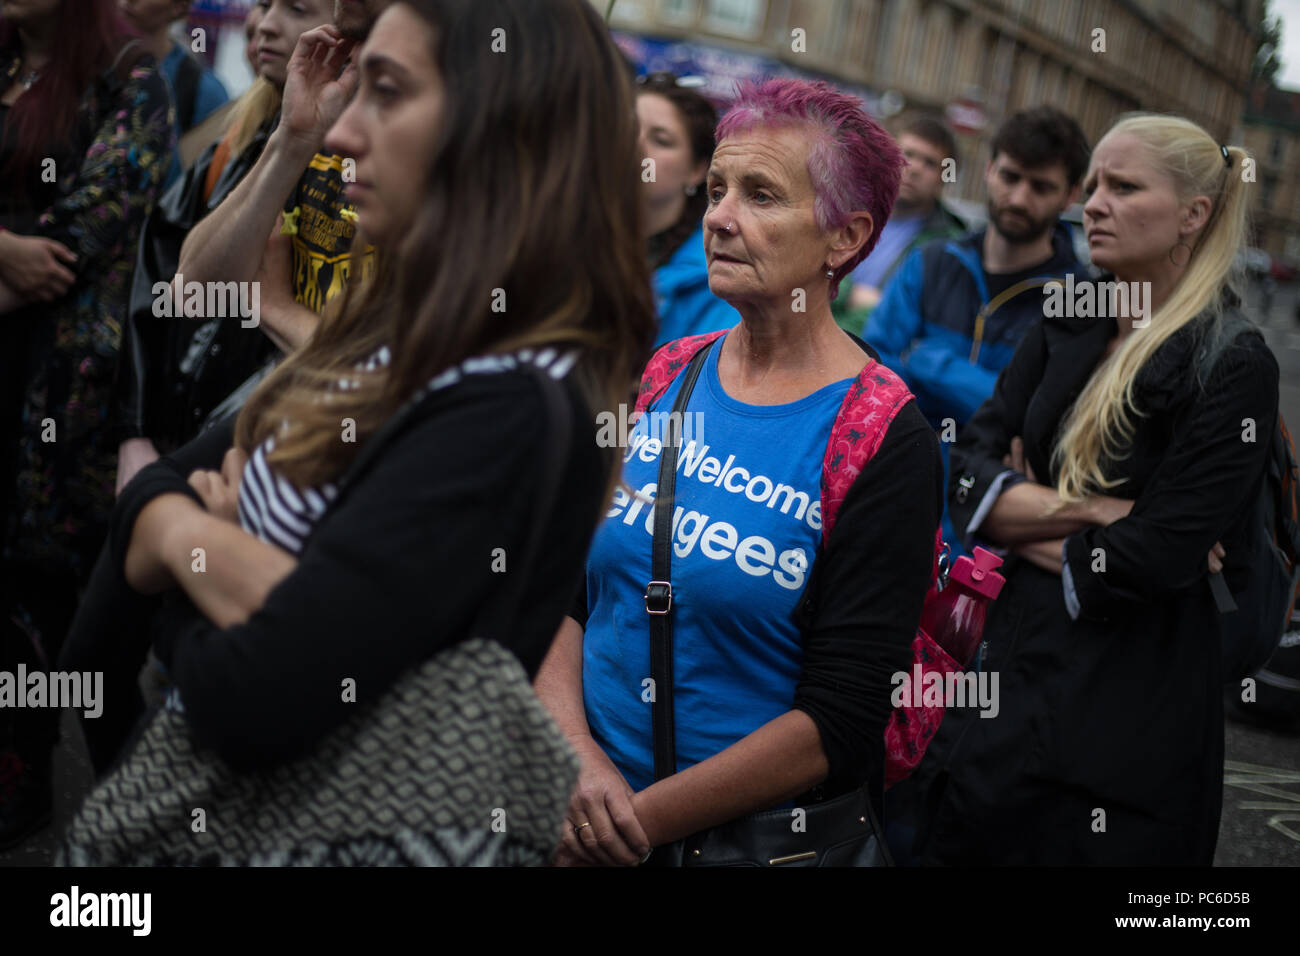 Glasgow, Scotland, on 1 August 2018. Rally in support of refugees facing eviction by private housing company SERCO. SERCO announced this week that they would begin to evict asylum seekers who have had their application for refugee status rejected. Up to 300 refugees are facing imminent eviction, including Afghan refugees Rahman Shah and Mirwais Ahmadzai who have gone on hunger strike outside a Home Office building in Glasgow. Image credit: Jeremy Sutton-Hibbert/ Alamy News Stock Photo